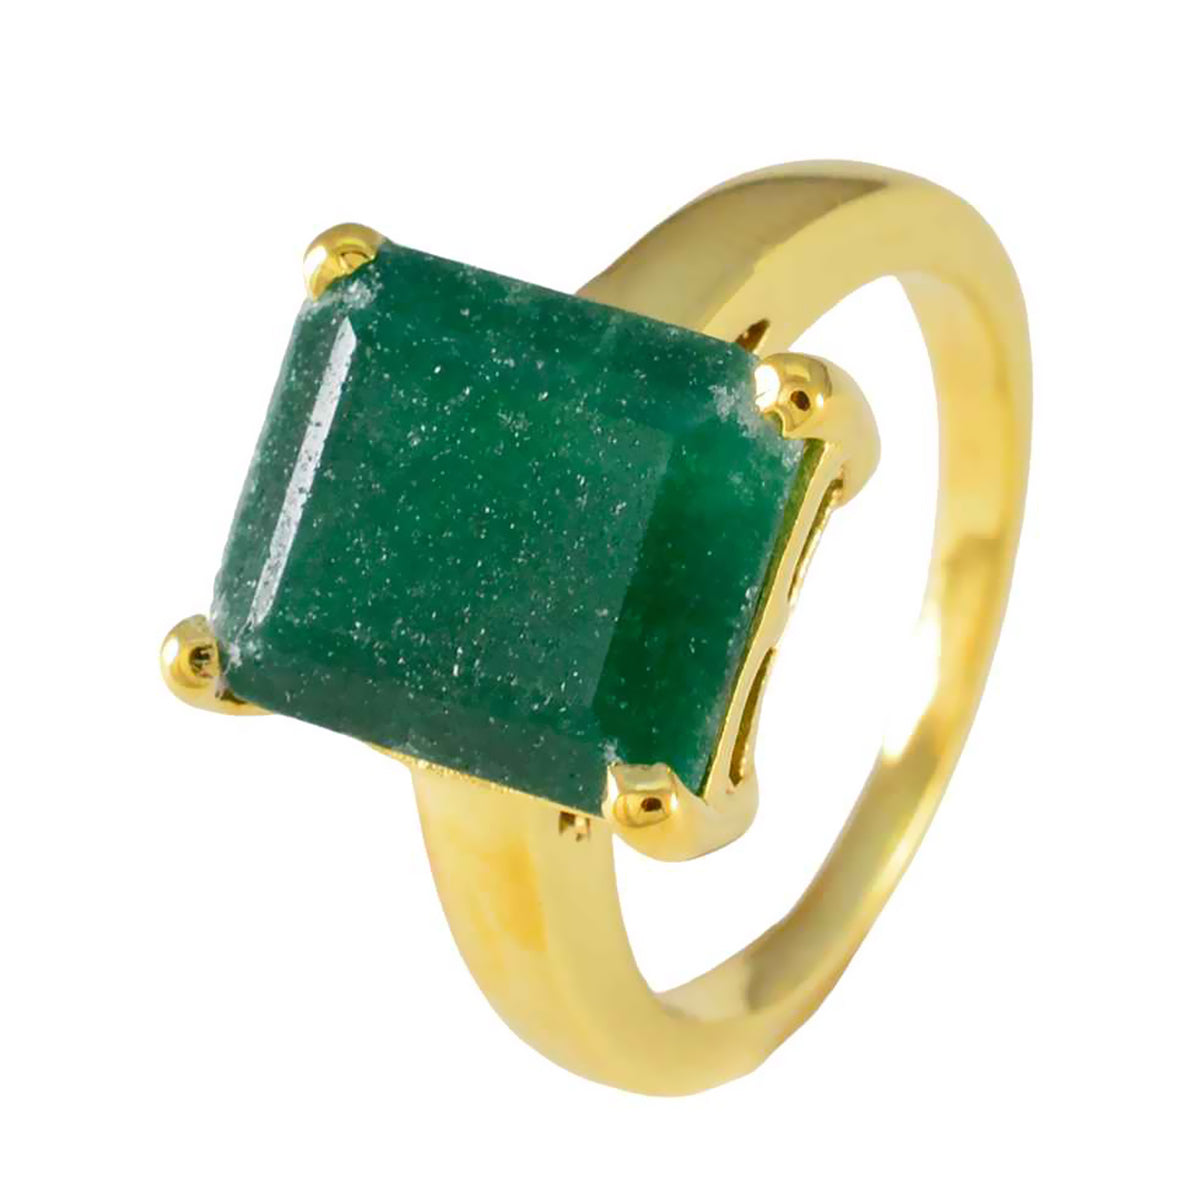 Riyo Mature Silver Ring With Yellow Gold Plating Indian Emerald Stone Octagon Shape Prong Setting Fashion Jewelry Valentines Day Ring